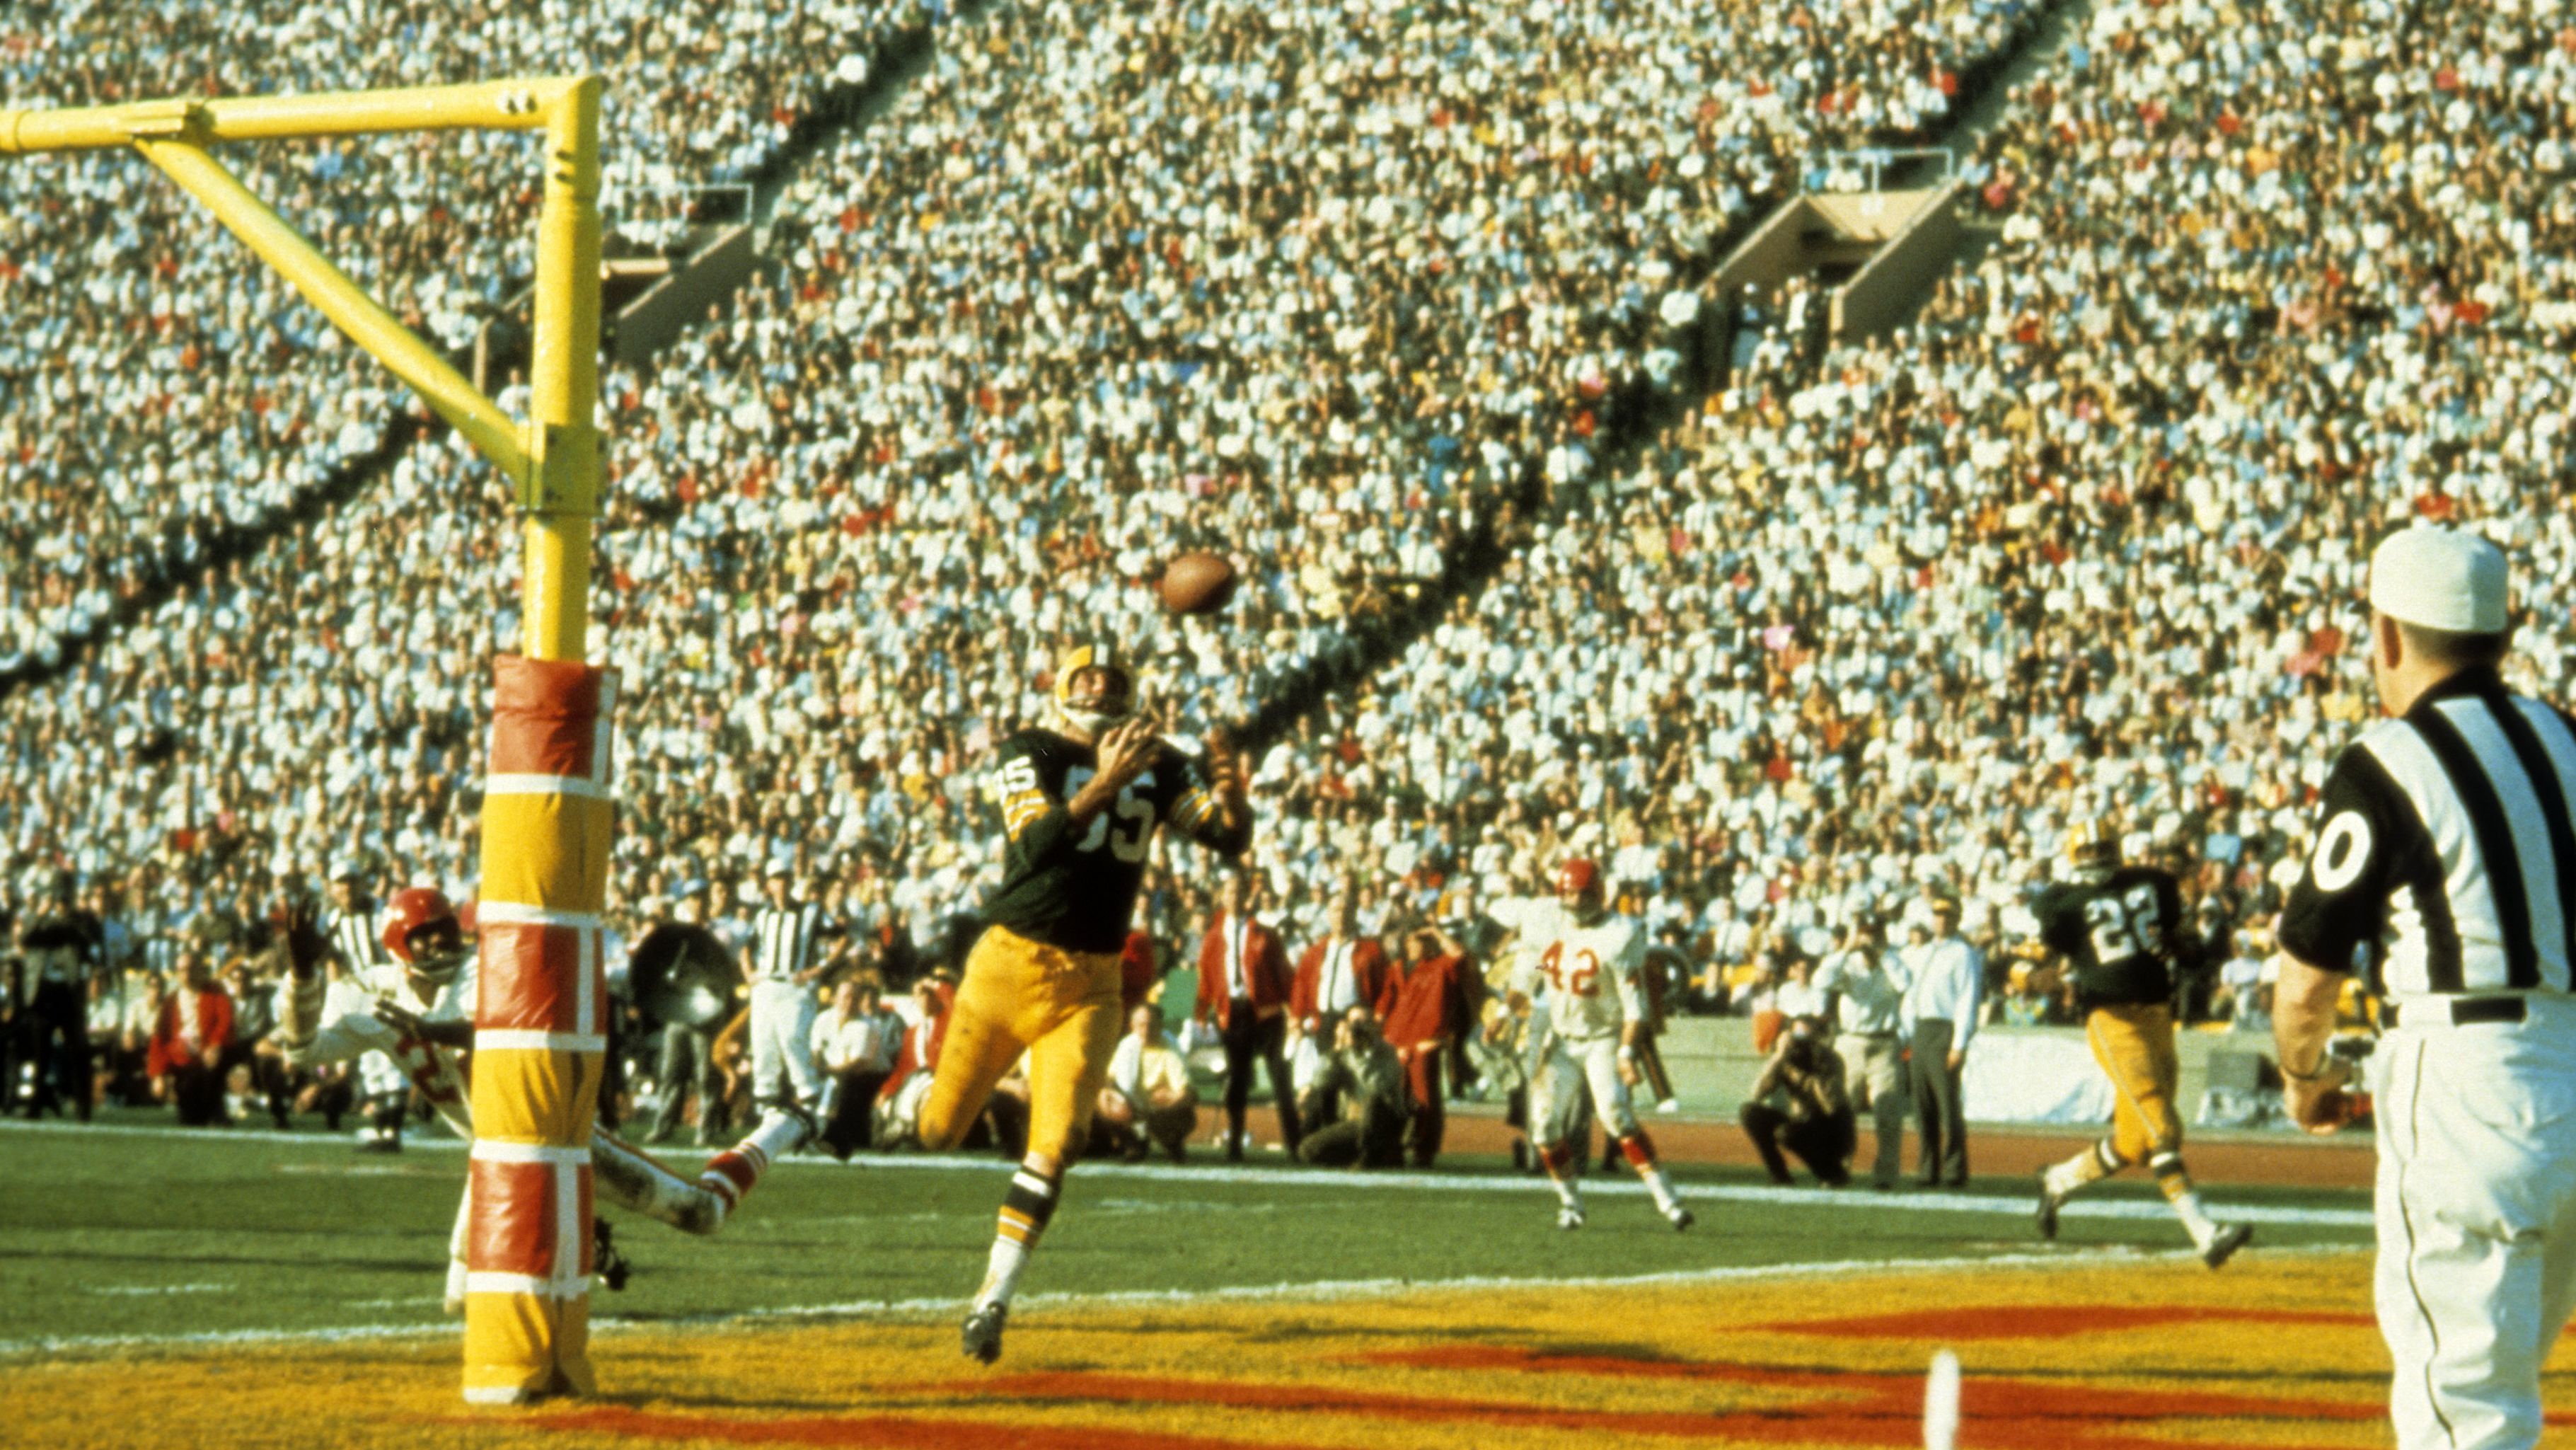 Packers wide receiver Max McGee pulls in a 13-yard touchdown pass during the third quarter. In the first quarter, McGee <a href="http://www.cnn.com/2015/01/25/us/gallery/super-bowl-superlatives/index.html" target="_blank">made history</a> when he scored the first touchdown in Super Bowl history — a 37-yard score that he pulled in with one hand. <a href="https://www.youtube.com/watch?v=X1WEFGMi0bI" target="_blank" target="_blank">Watch the replays</a>.